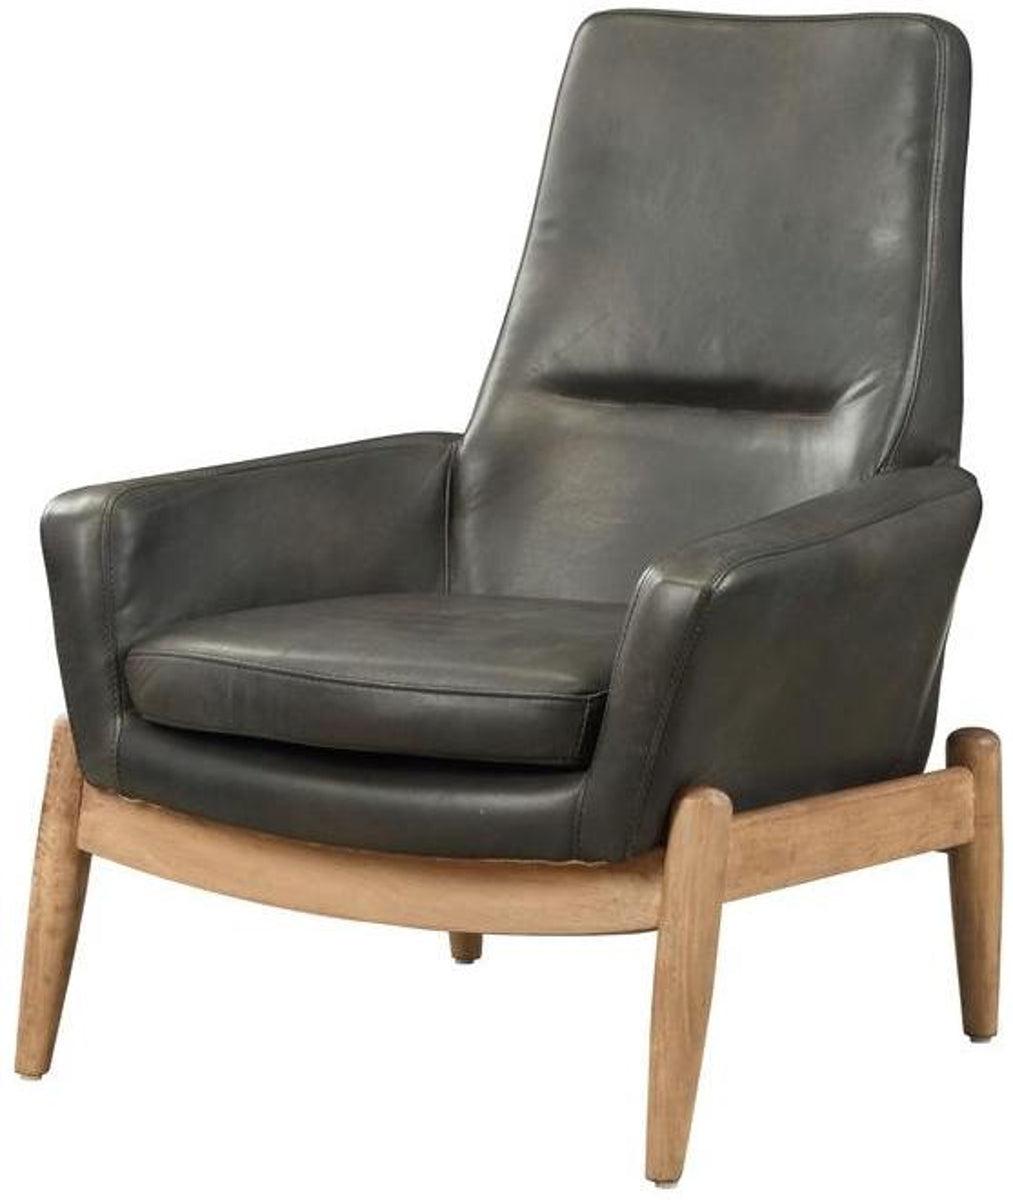 Acme Dolphin Accent Chair in Black 59533  Half Price Furniture